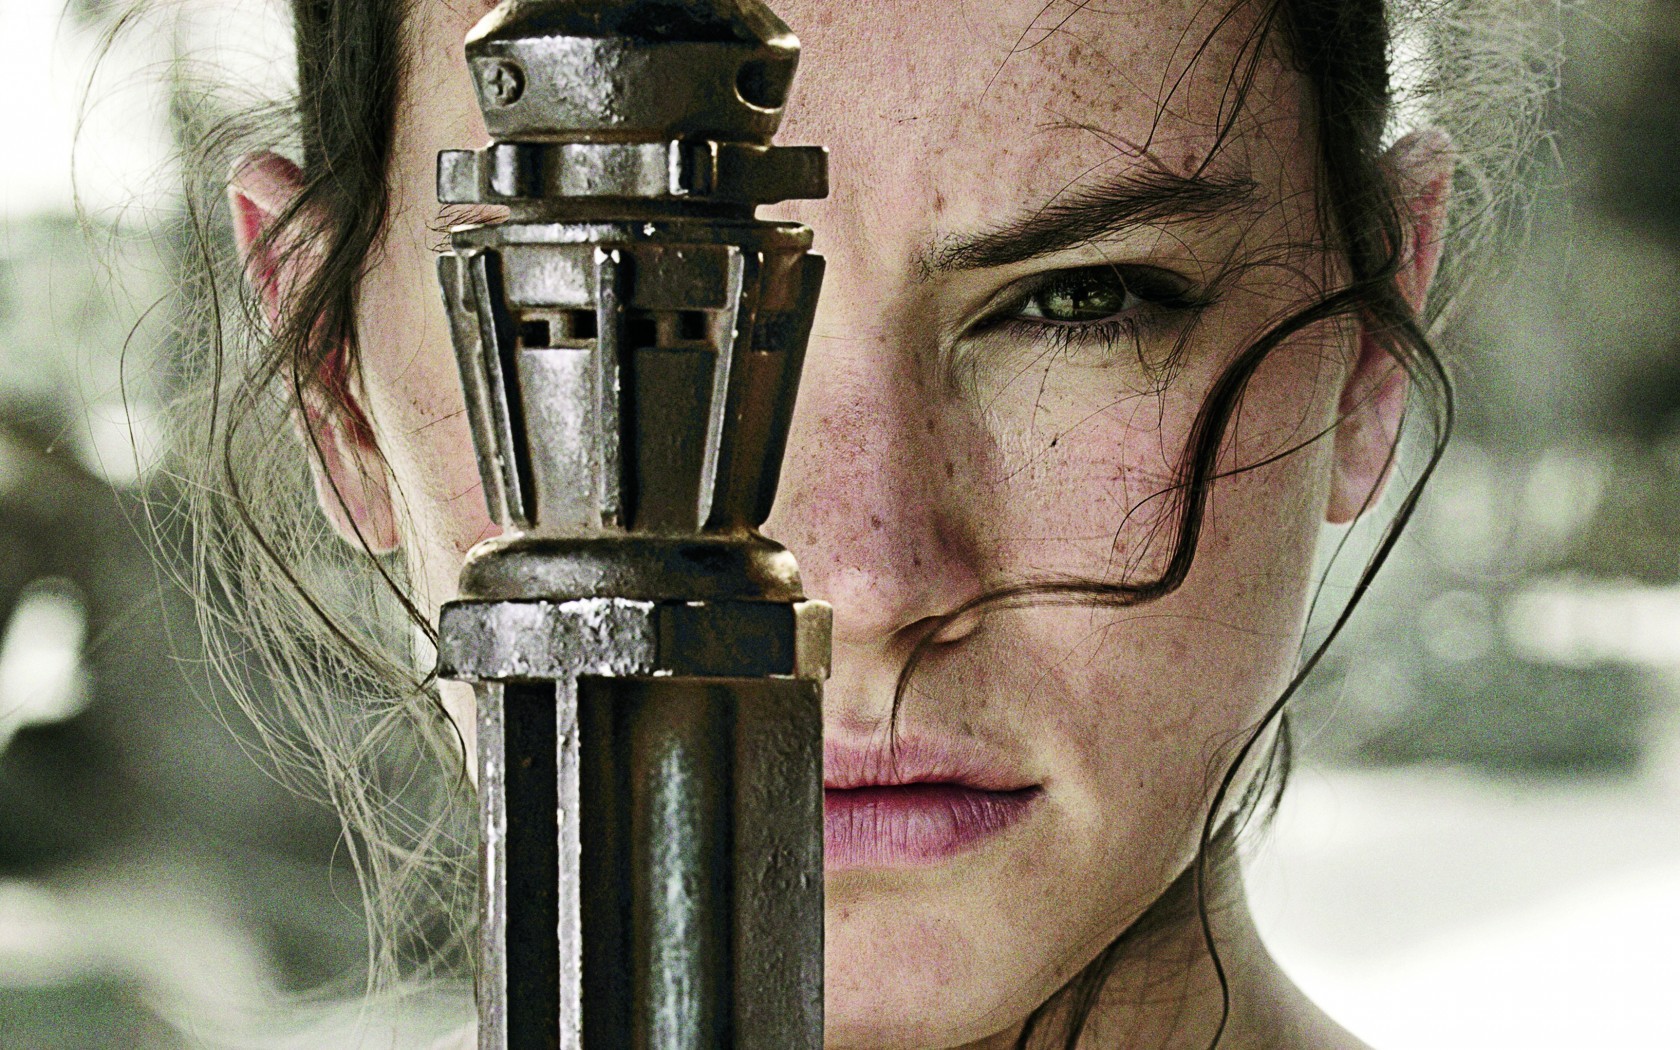 Daisy Ridley Star Wars Wallpapers